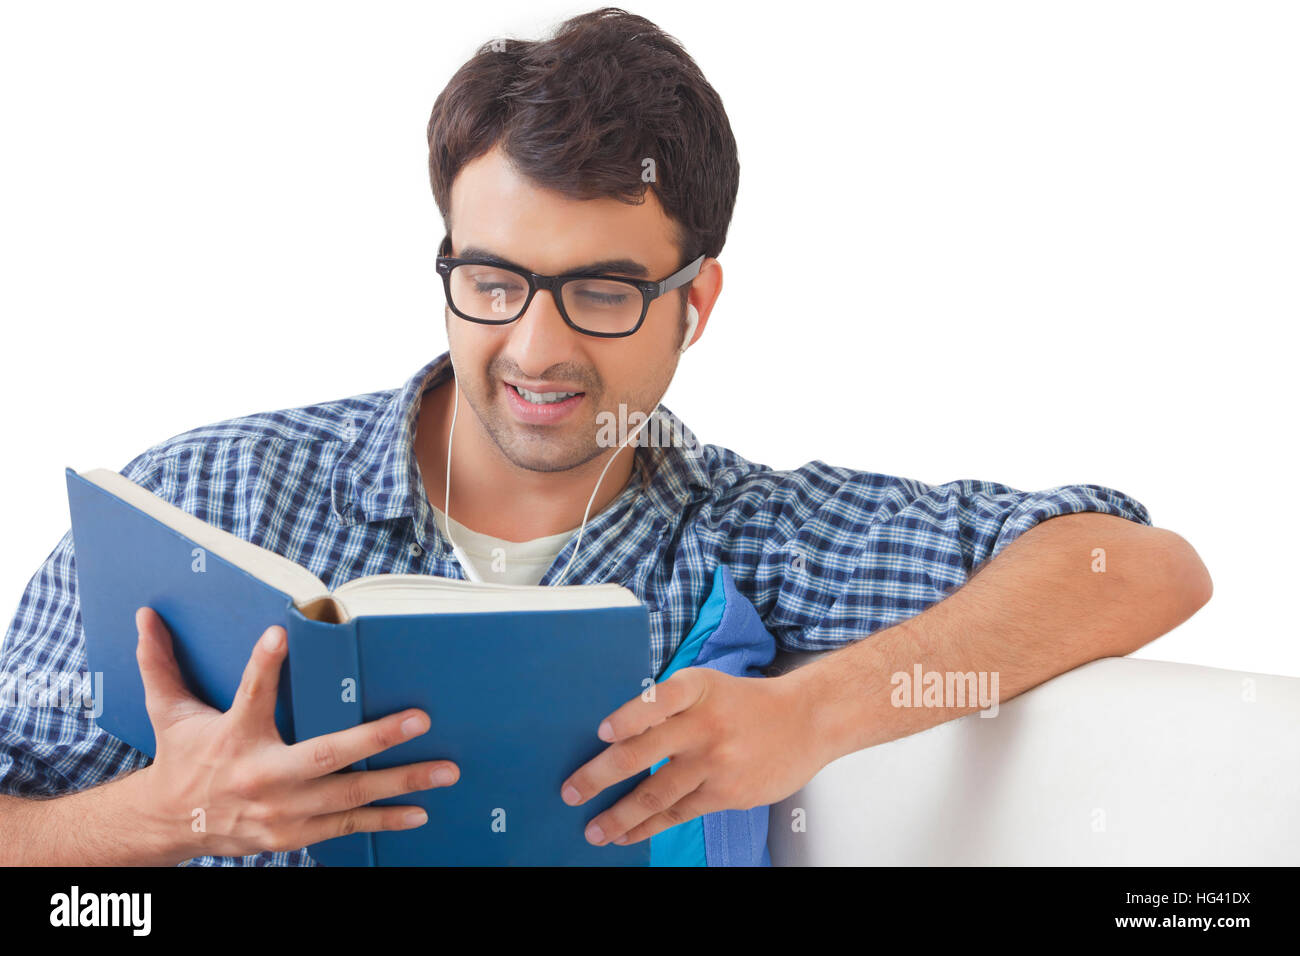 Young man reading book and listening music Stock Photo